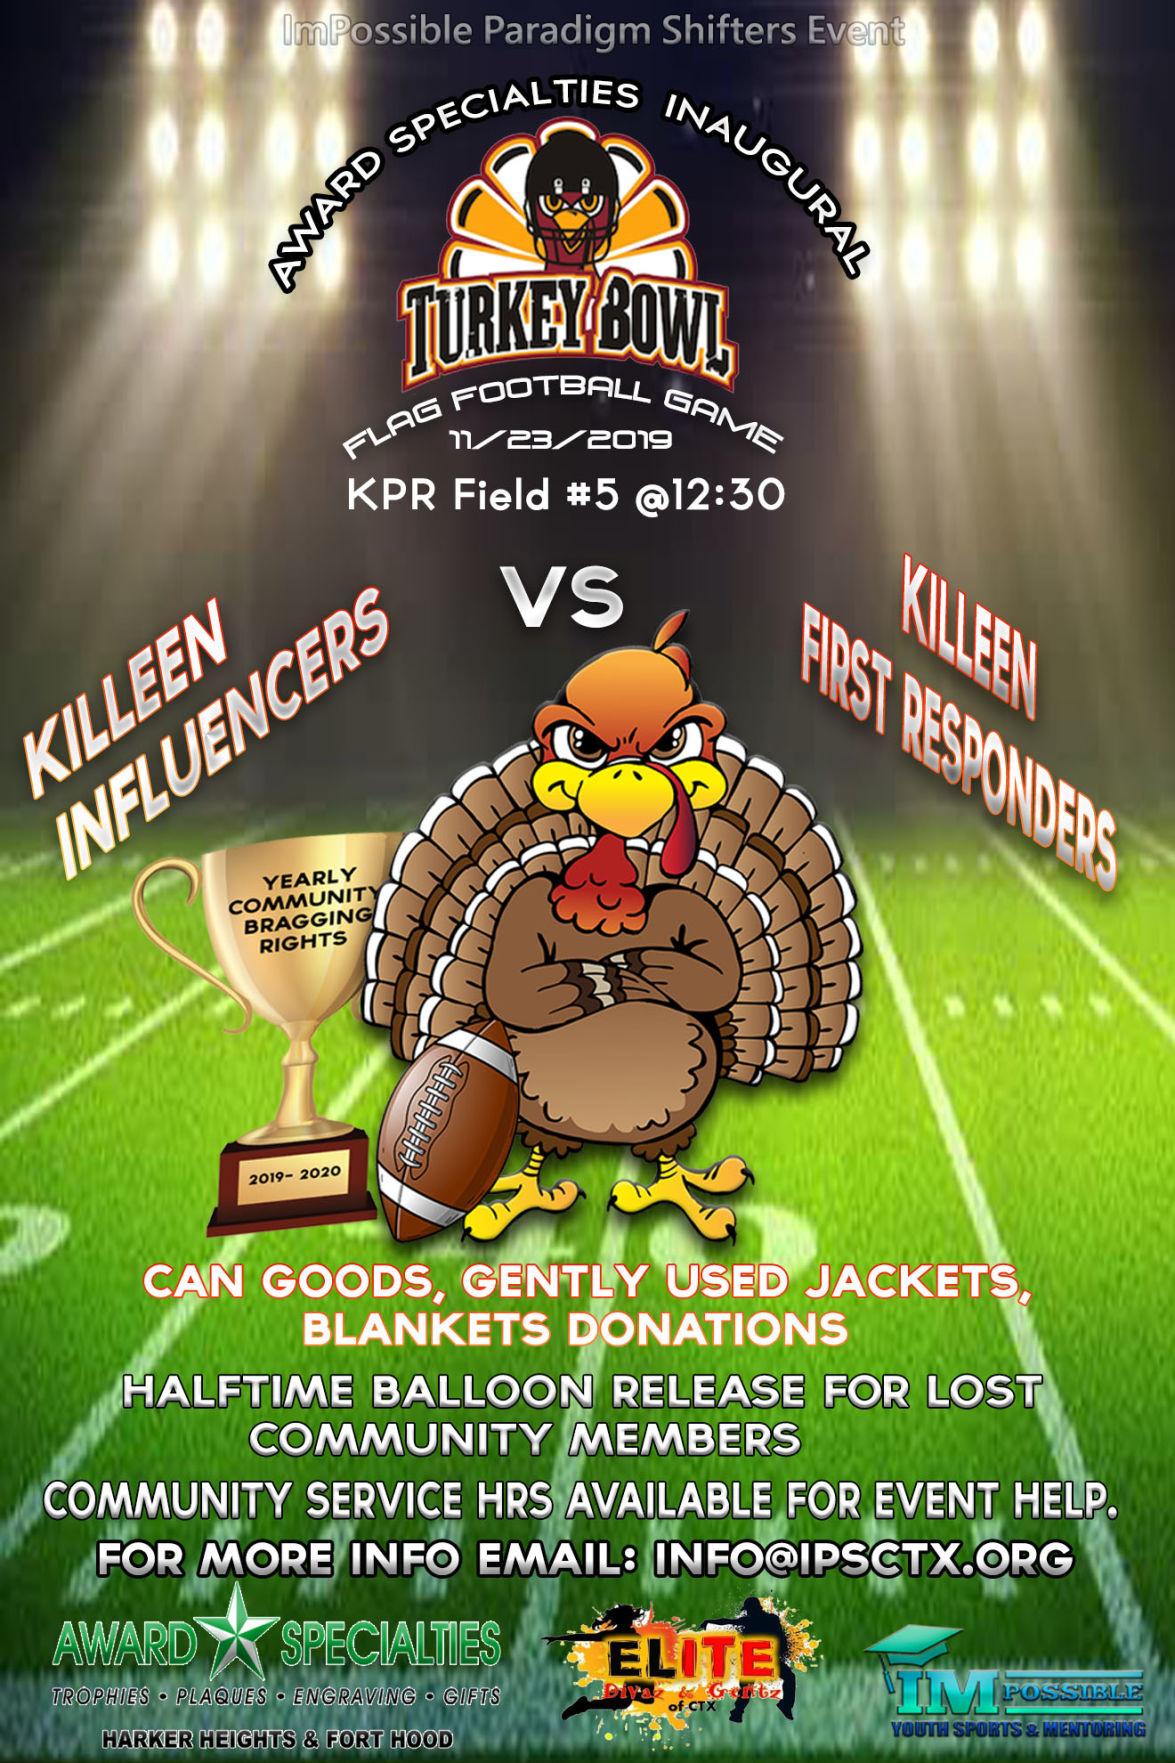 Inaugural Turkey Bowl game in Killeen - #KDHEvents | Events in the ...